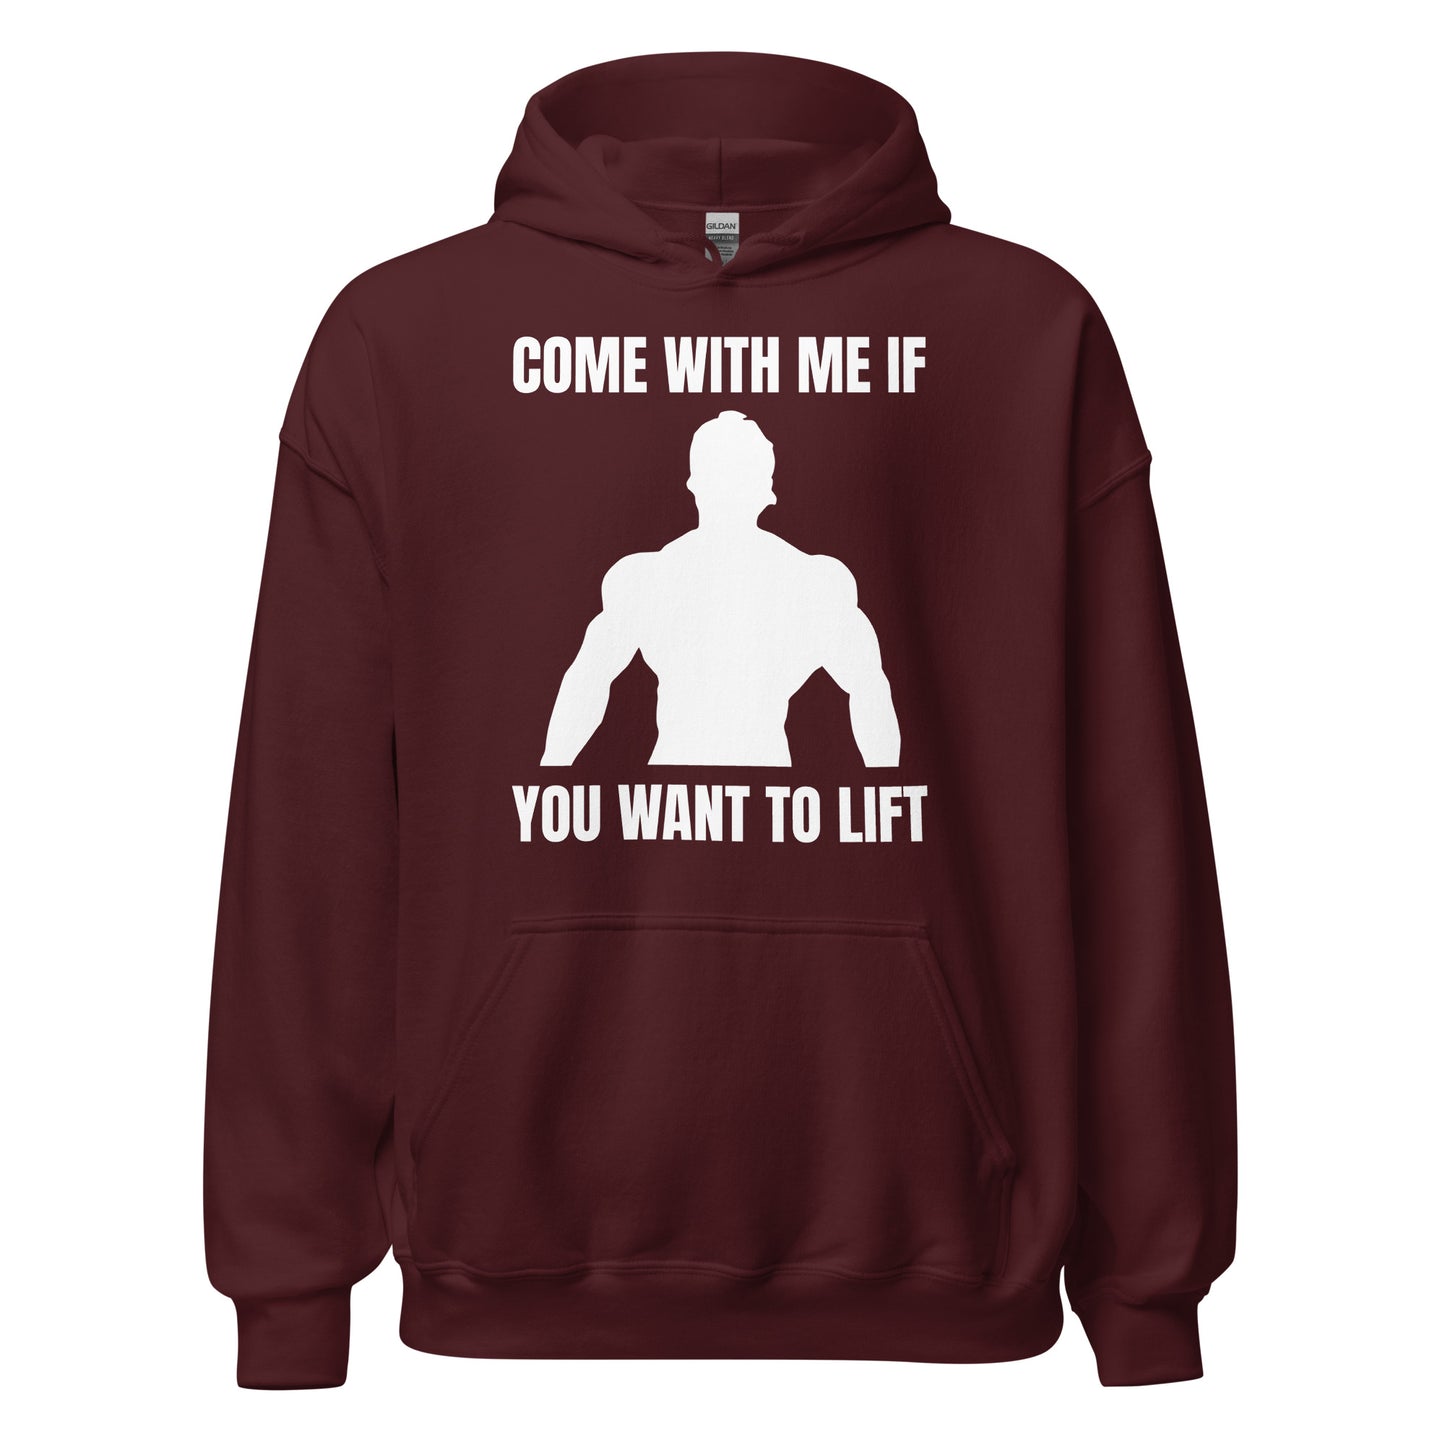 Come with Me if You Want to Lift Hoodie in Maroon